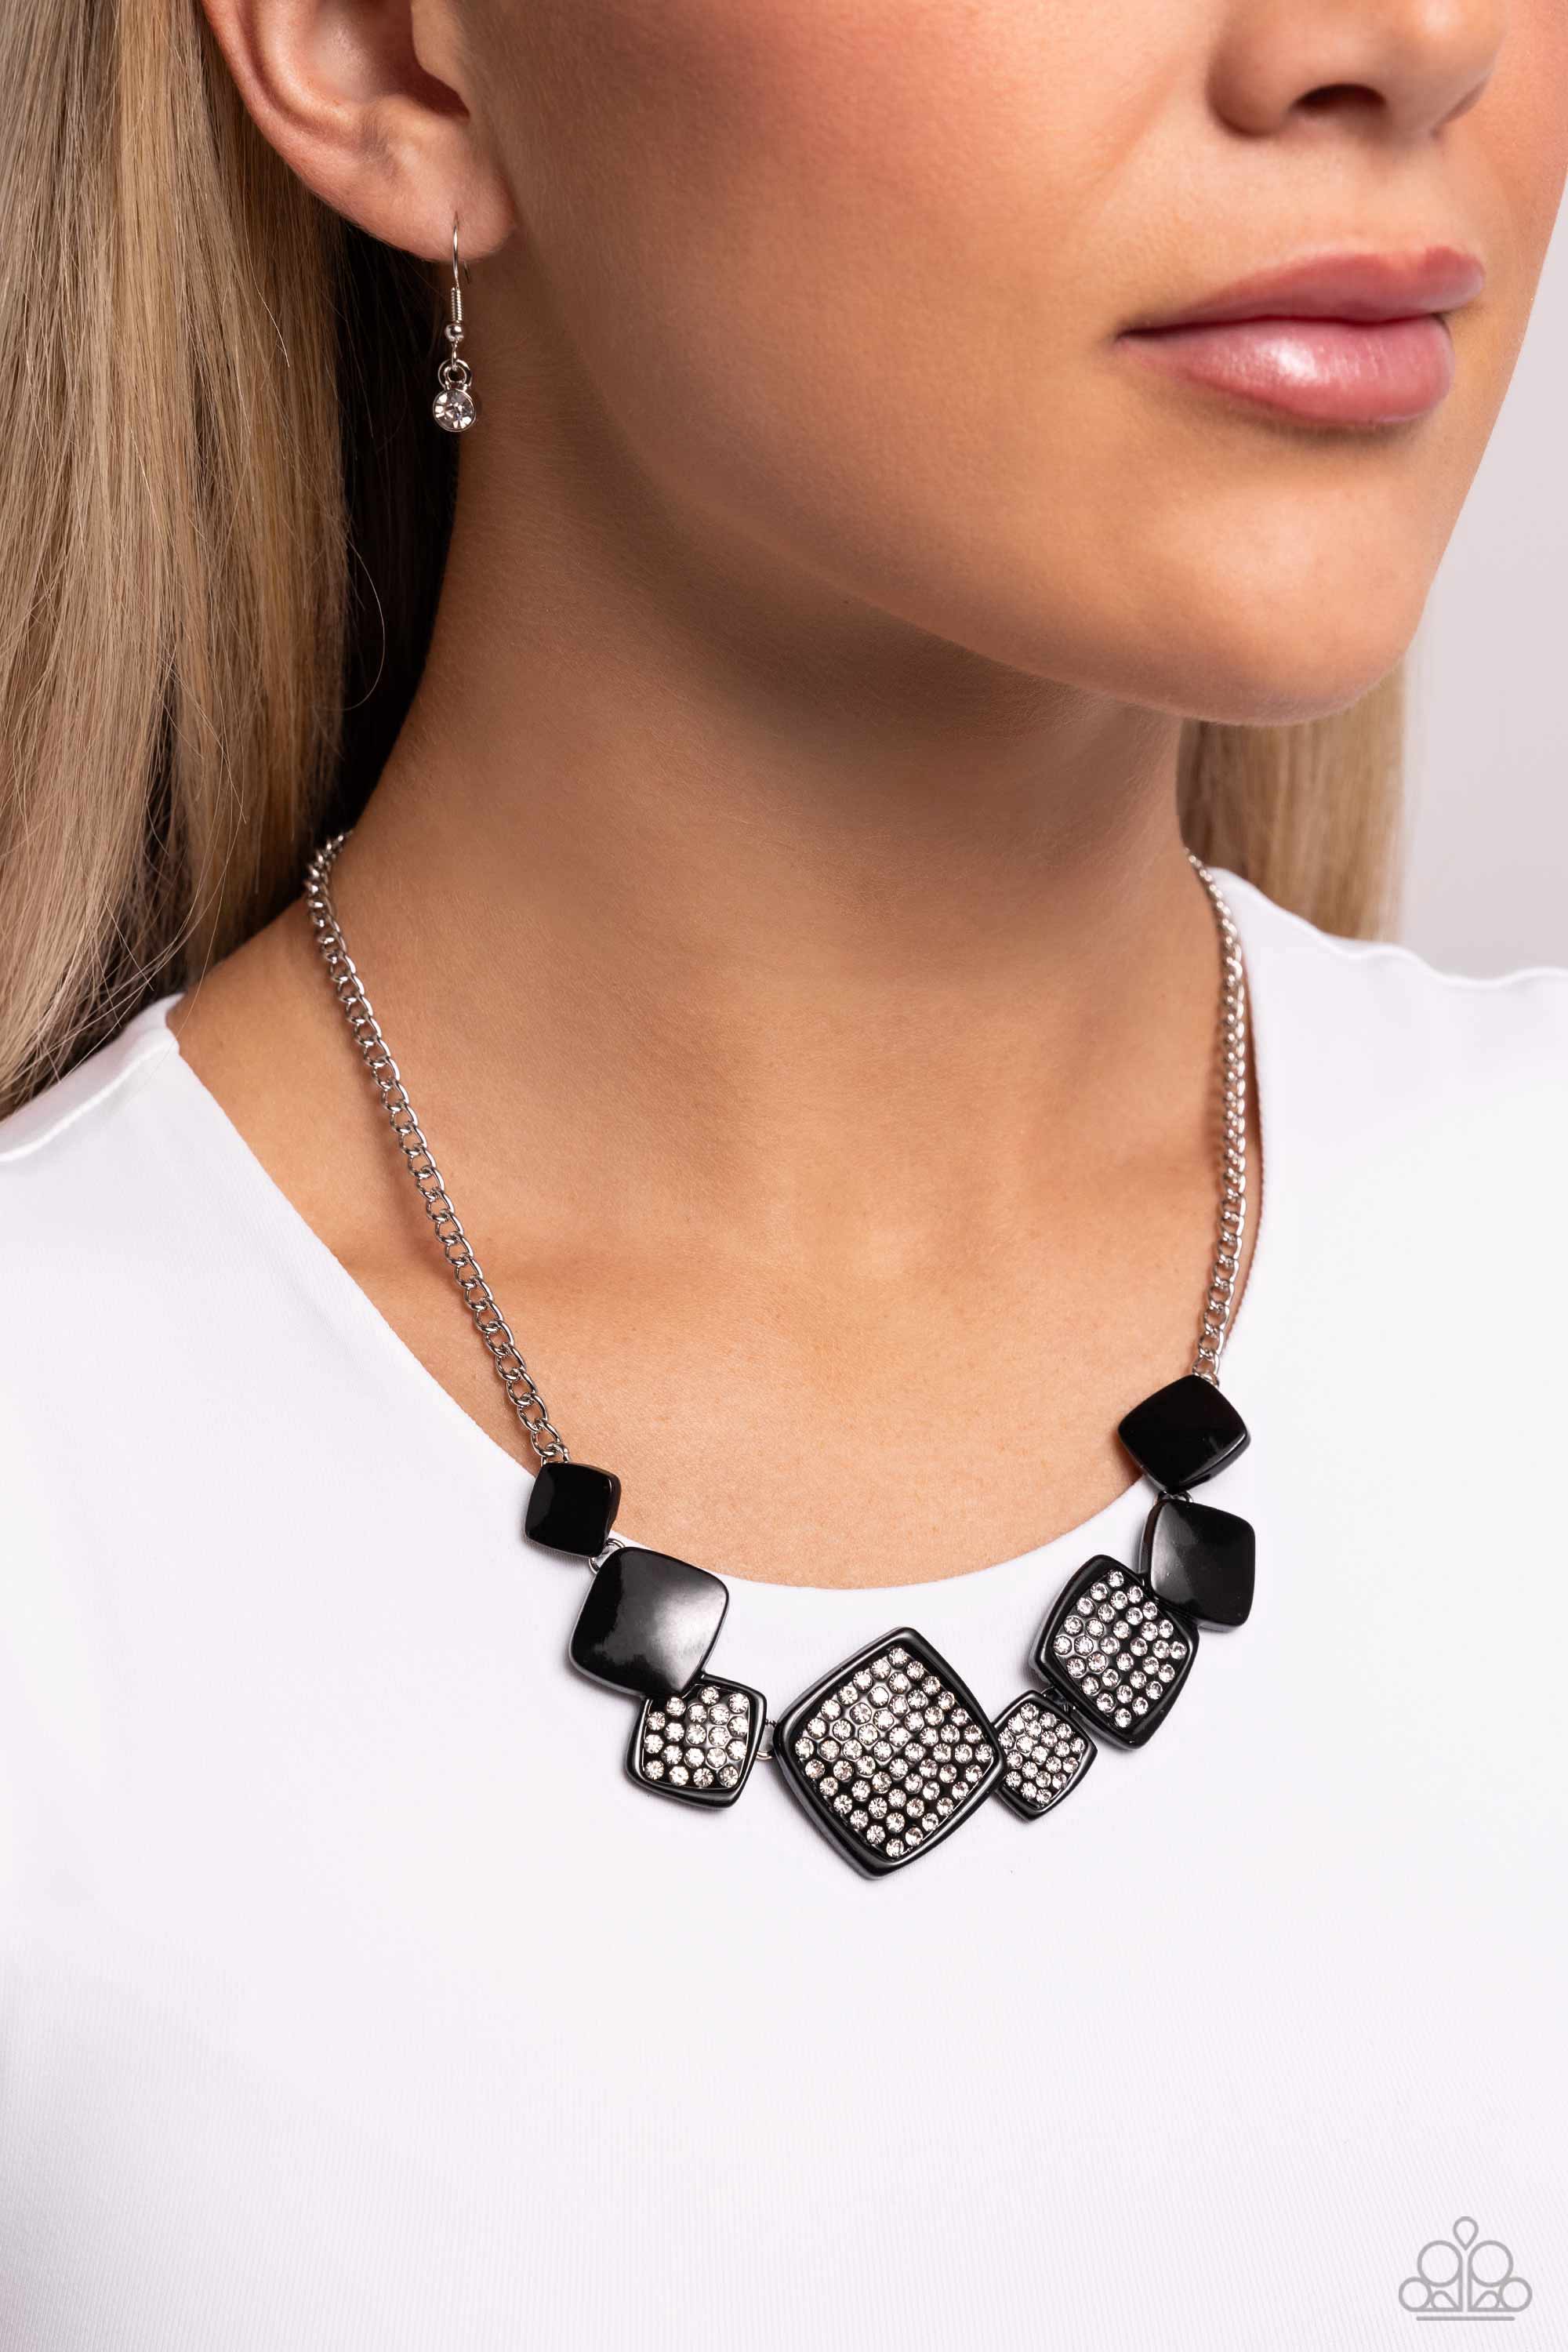 Lock, Stock, and SPARKLE - Black Necklace | Paparazzi Accessories | $5.00